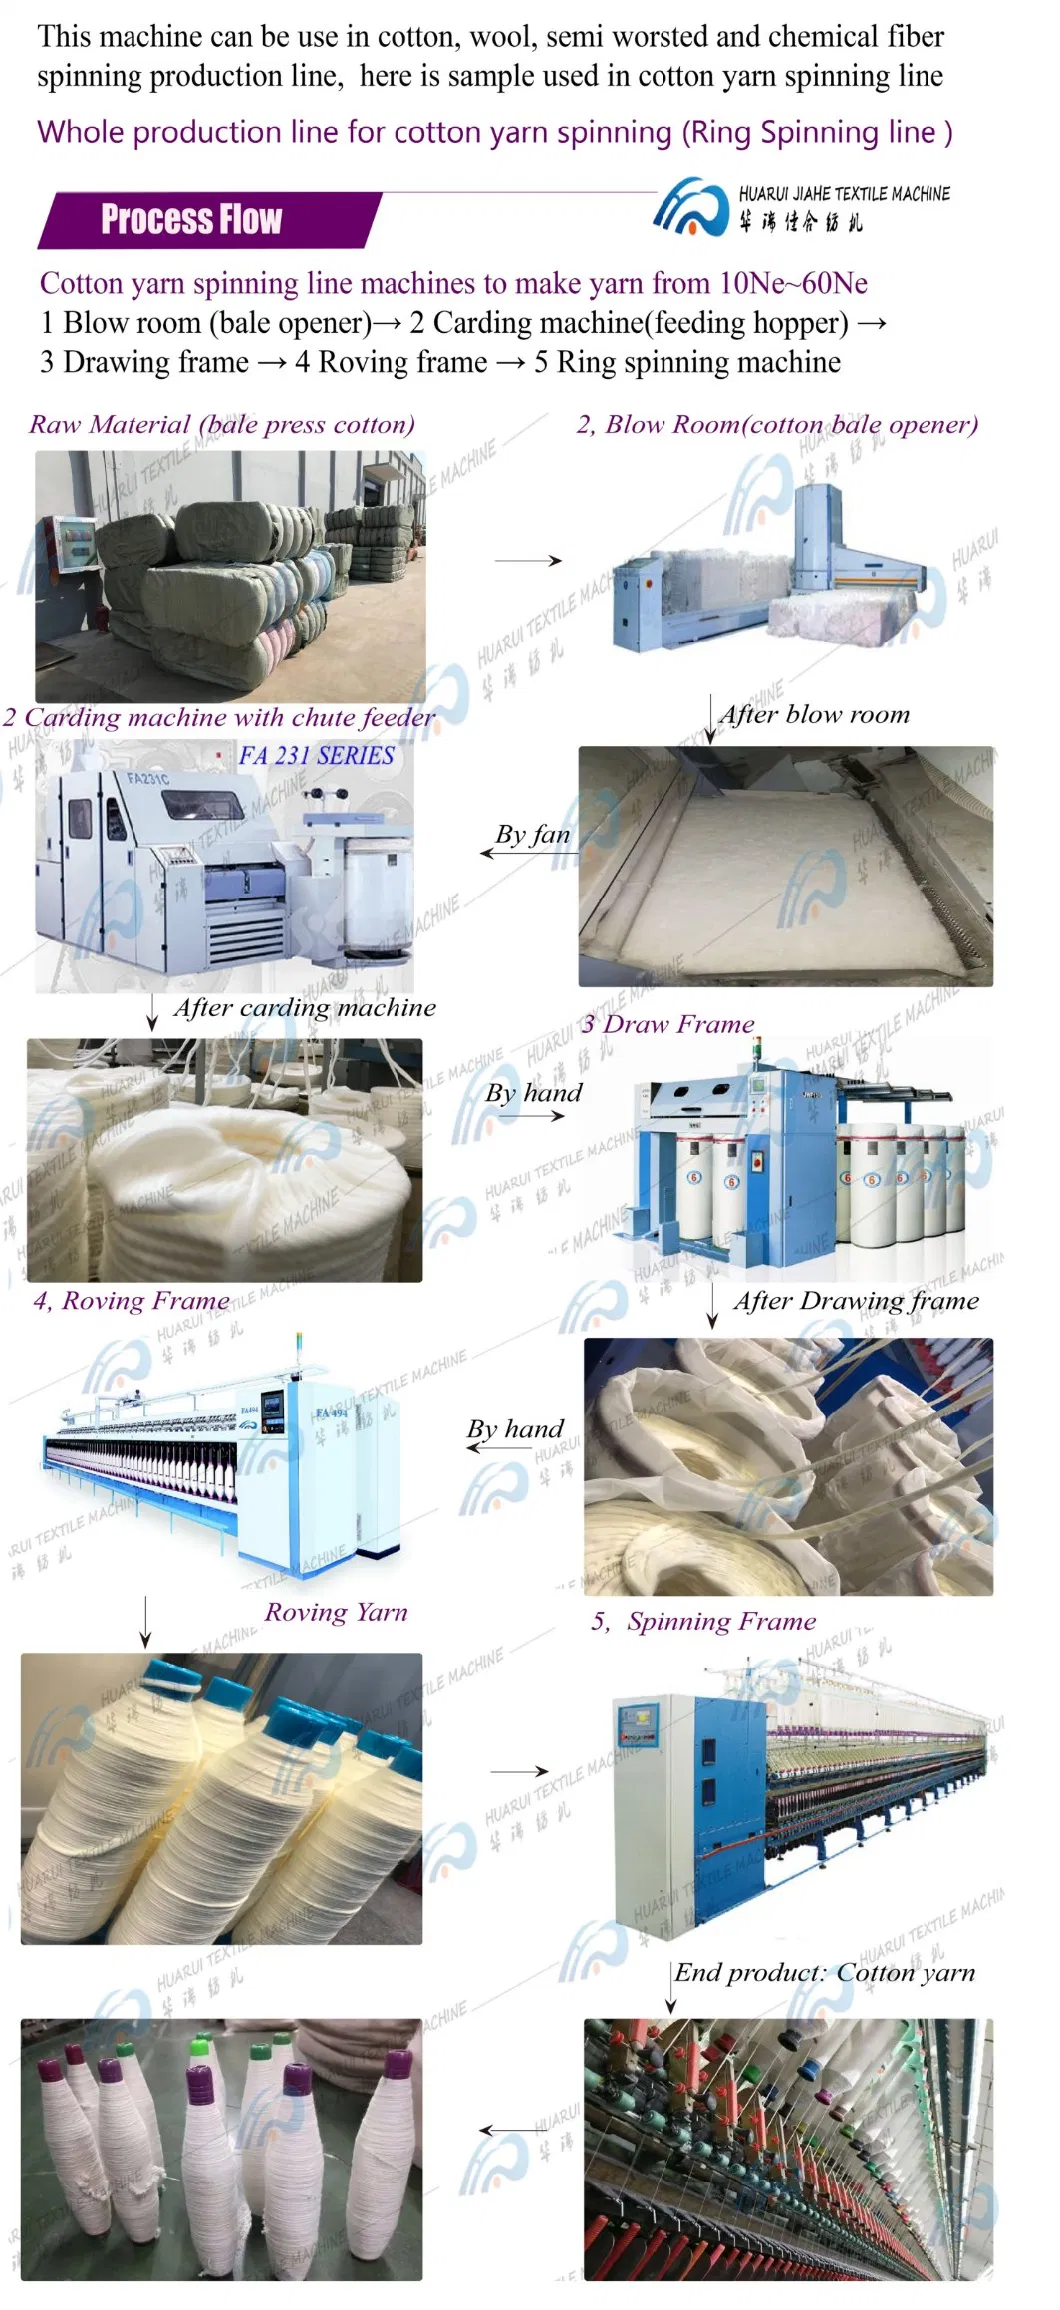 Top Quality Textile Dyeing Machine of China National Standard Yarn Cone Dyeing Machine China Cheap Fabric and Textile of Ce Standard Normal Temperature Dye